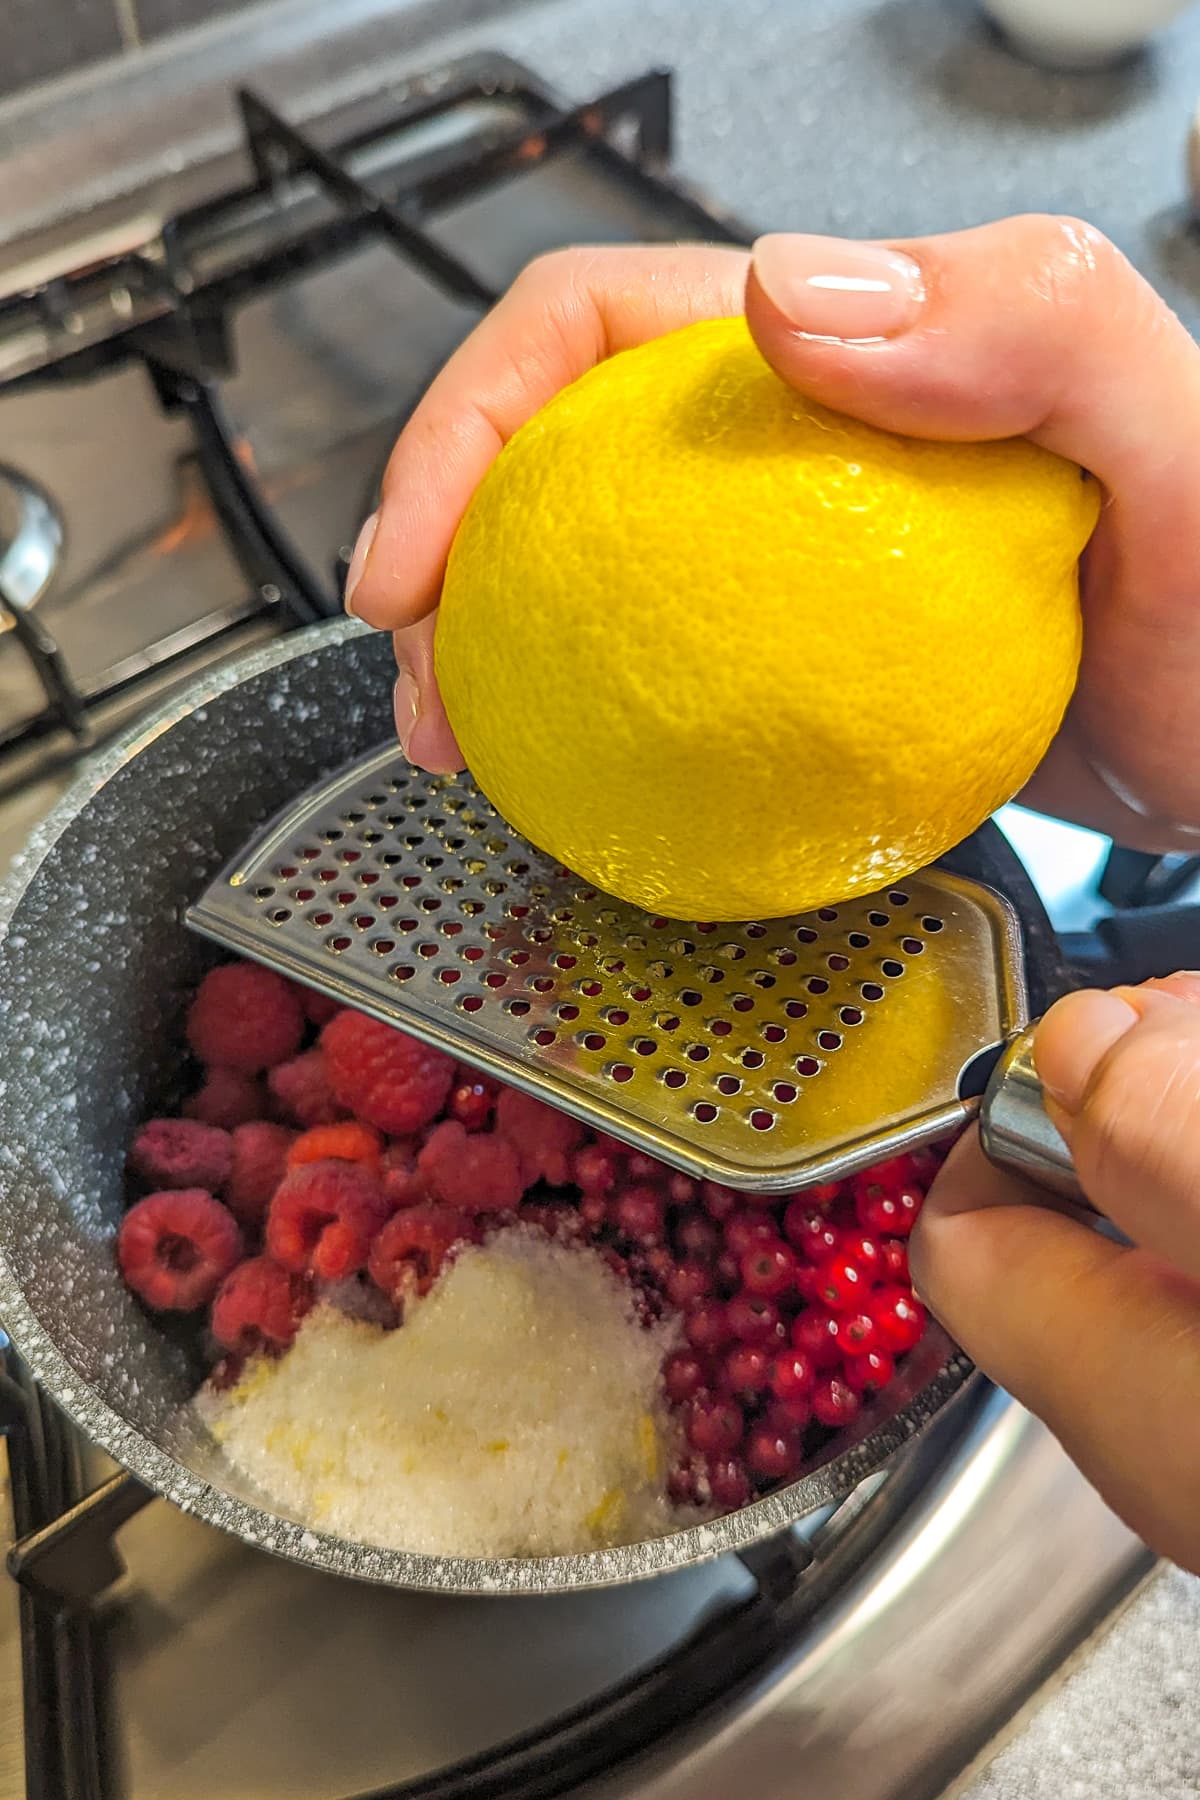 Peeling lemon over a saucepan with raspberries and Red currants.